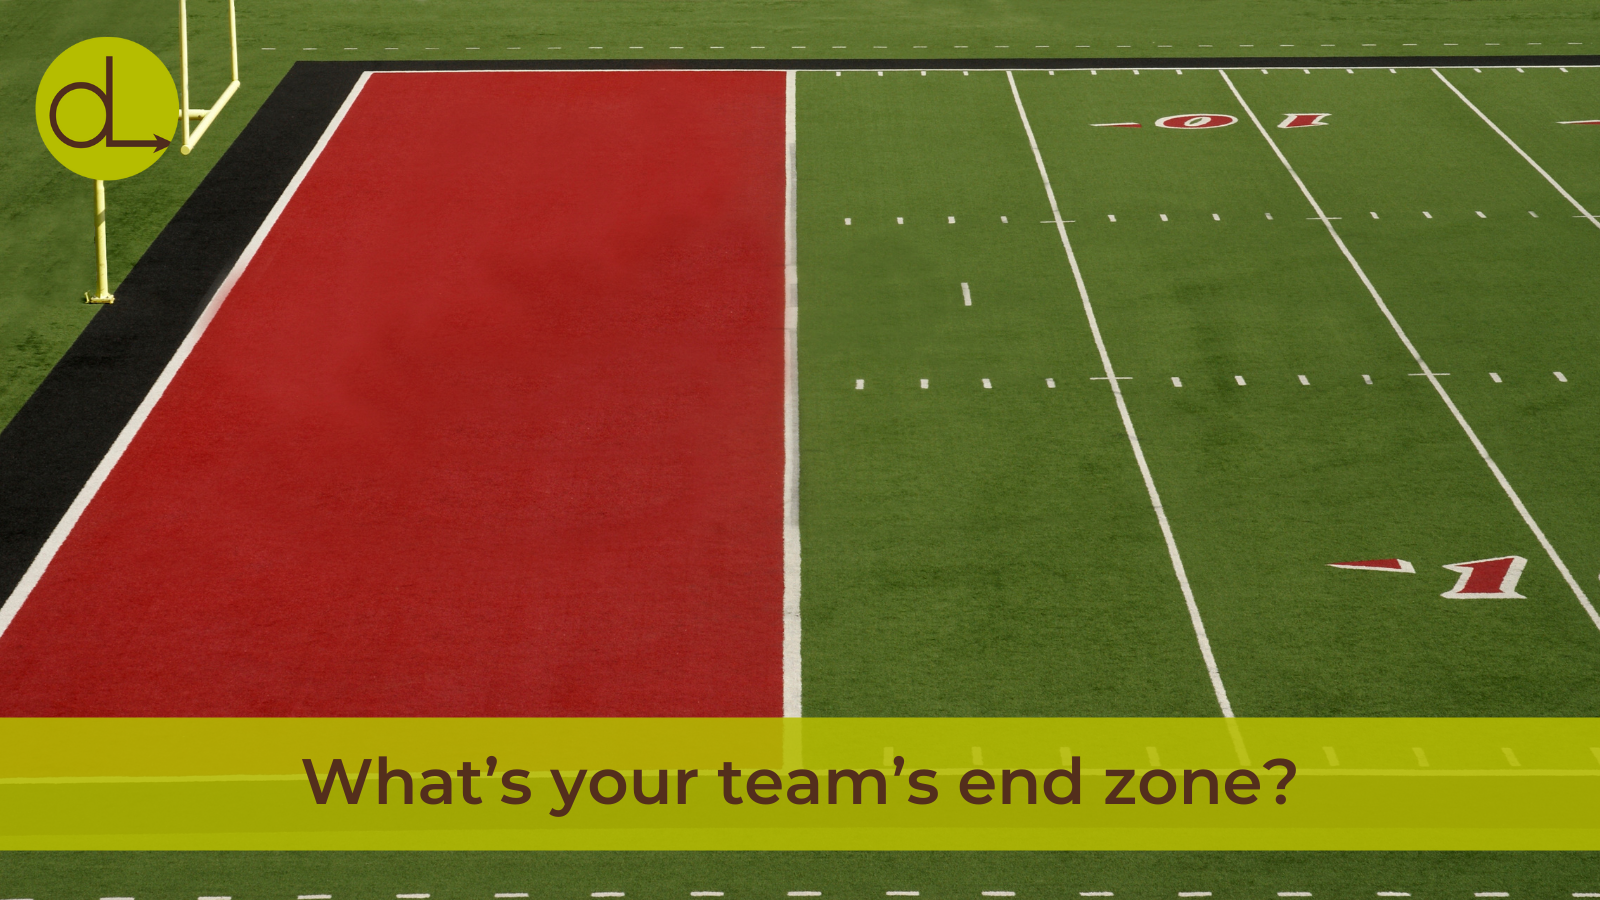 The end zone of a football field